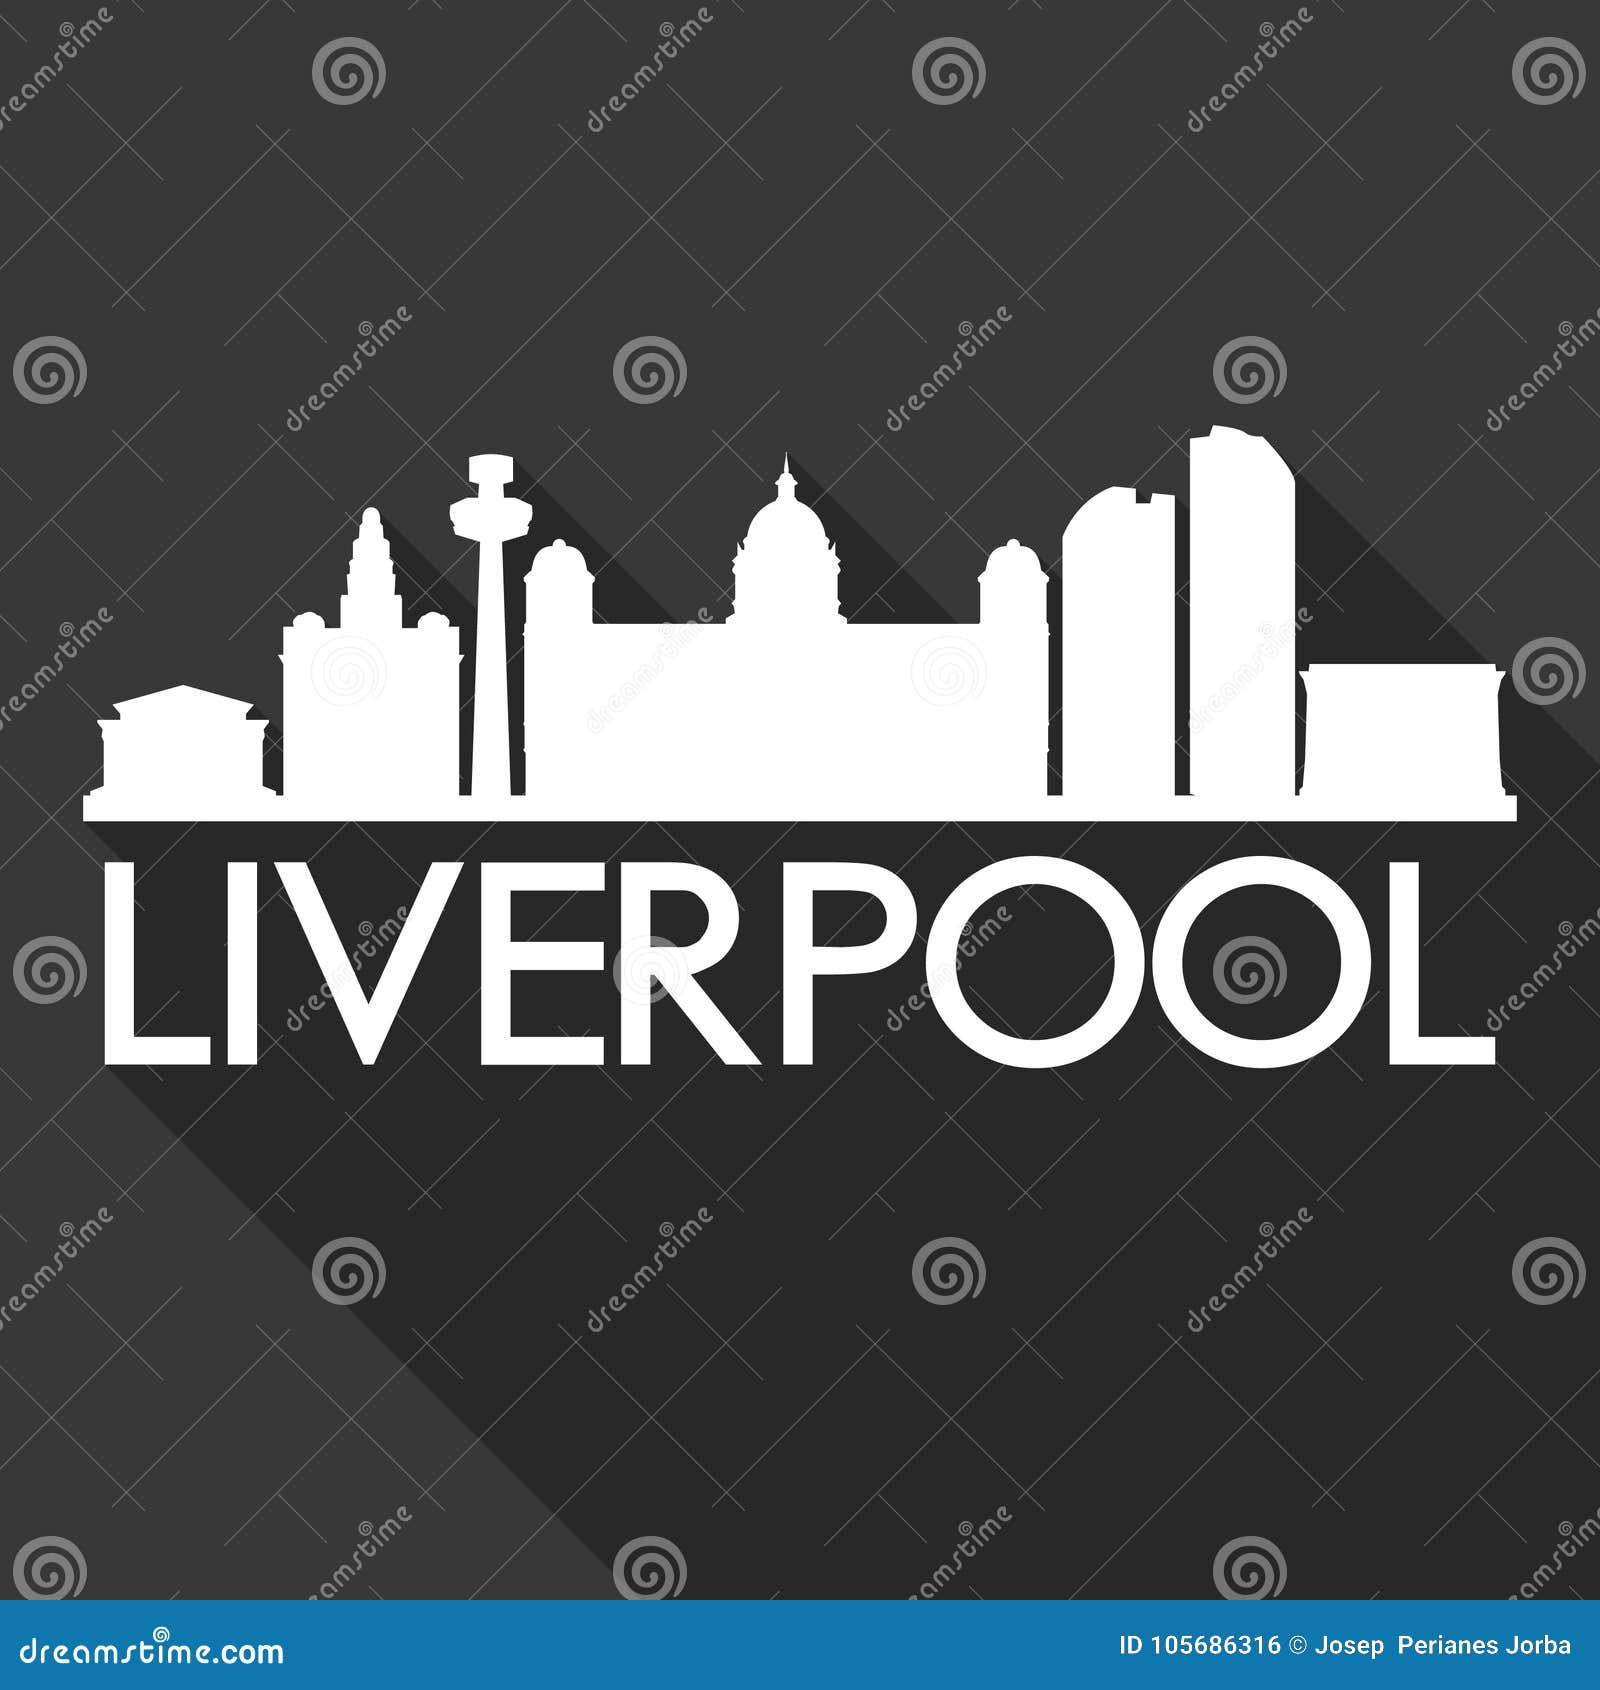 Liverpool England United Kingdom Europe Euro Icon Vector Art Flat Shadow Design Skyline City Silhouette Template Black Background Stock Vector Illustration Of Architecture Business 105686316